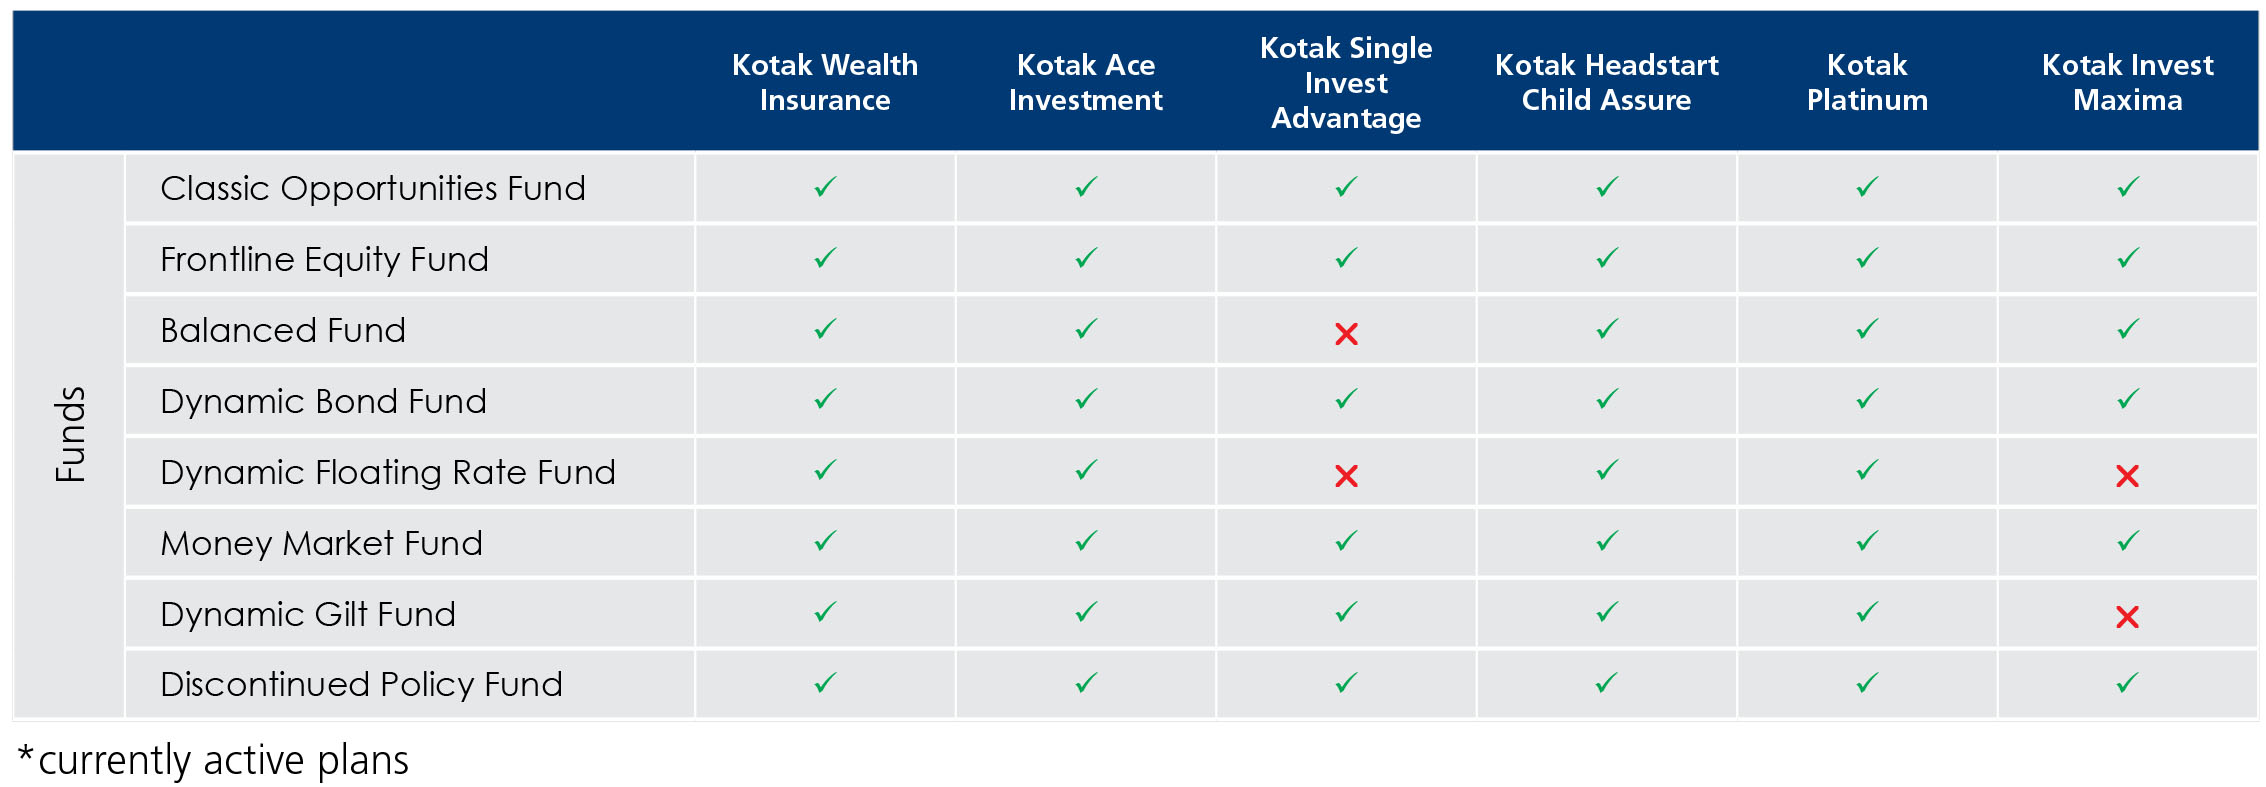  currently active  investement  plans of kotak group   